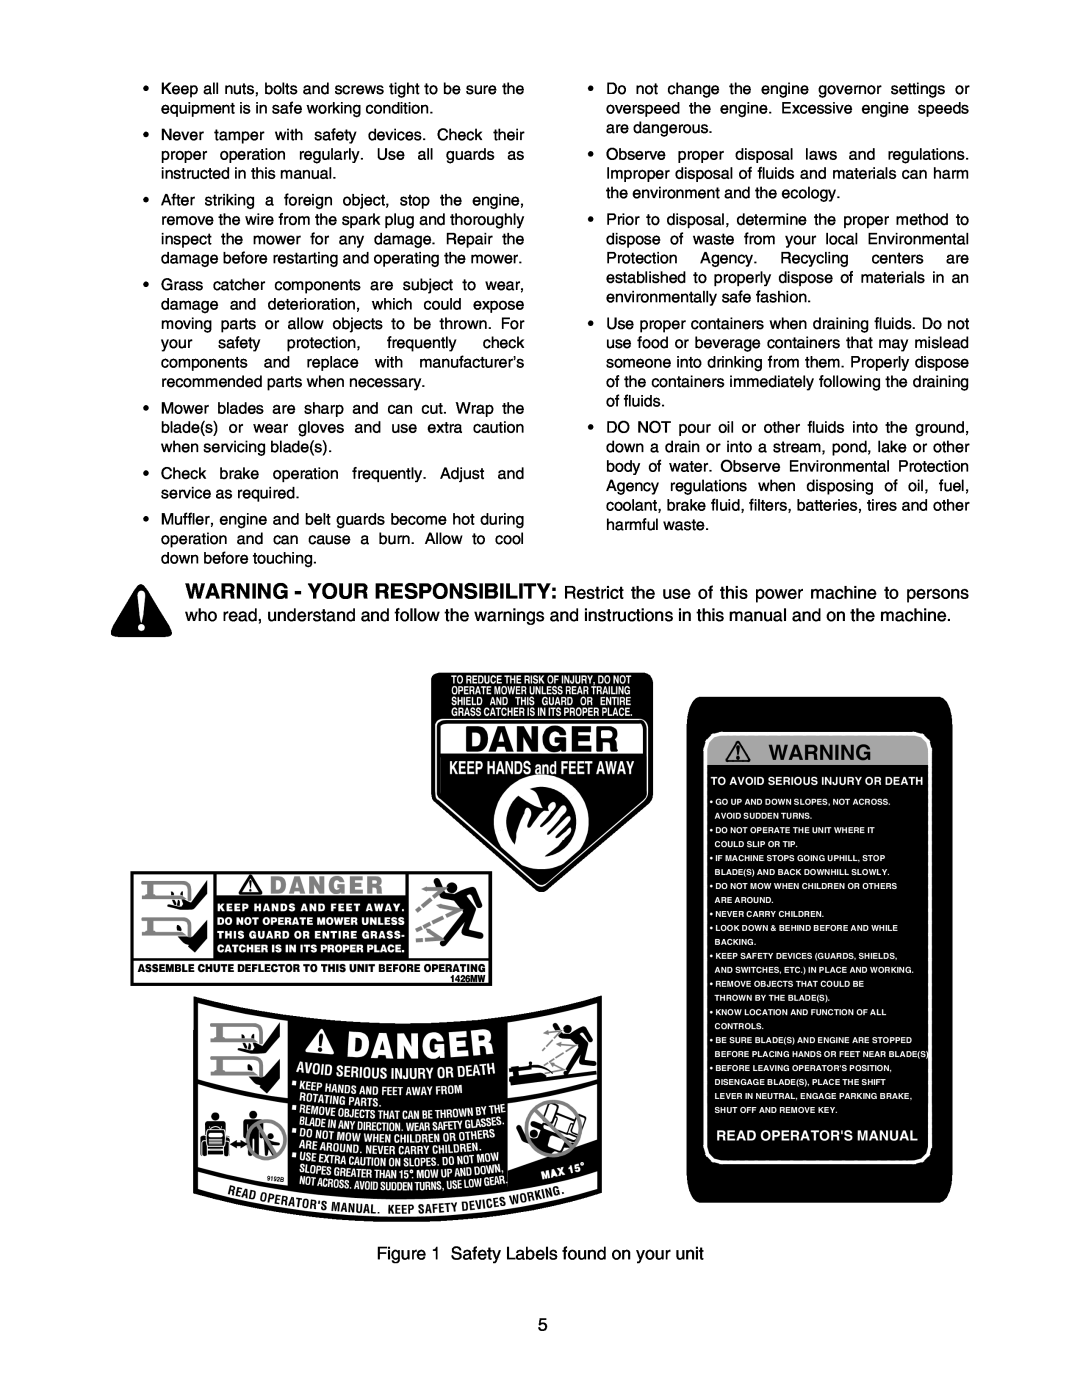 MTD 608, 609 manual Safety Labels found on your unit, Read Operators Manual 